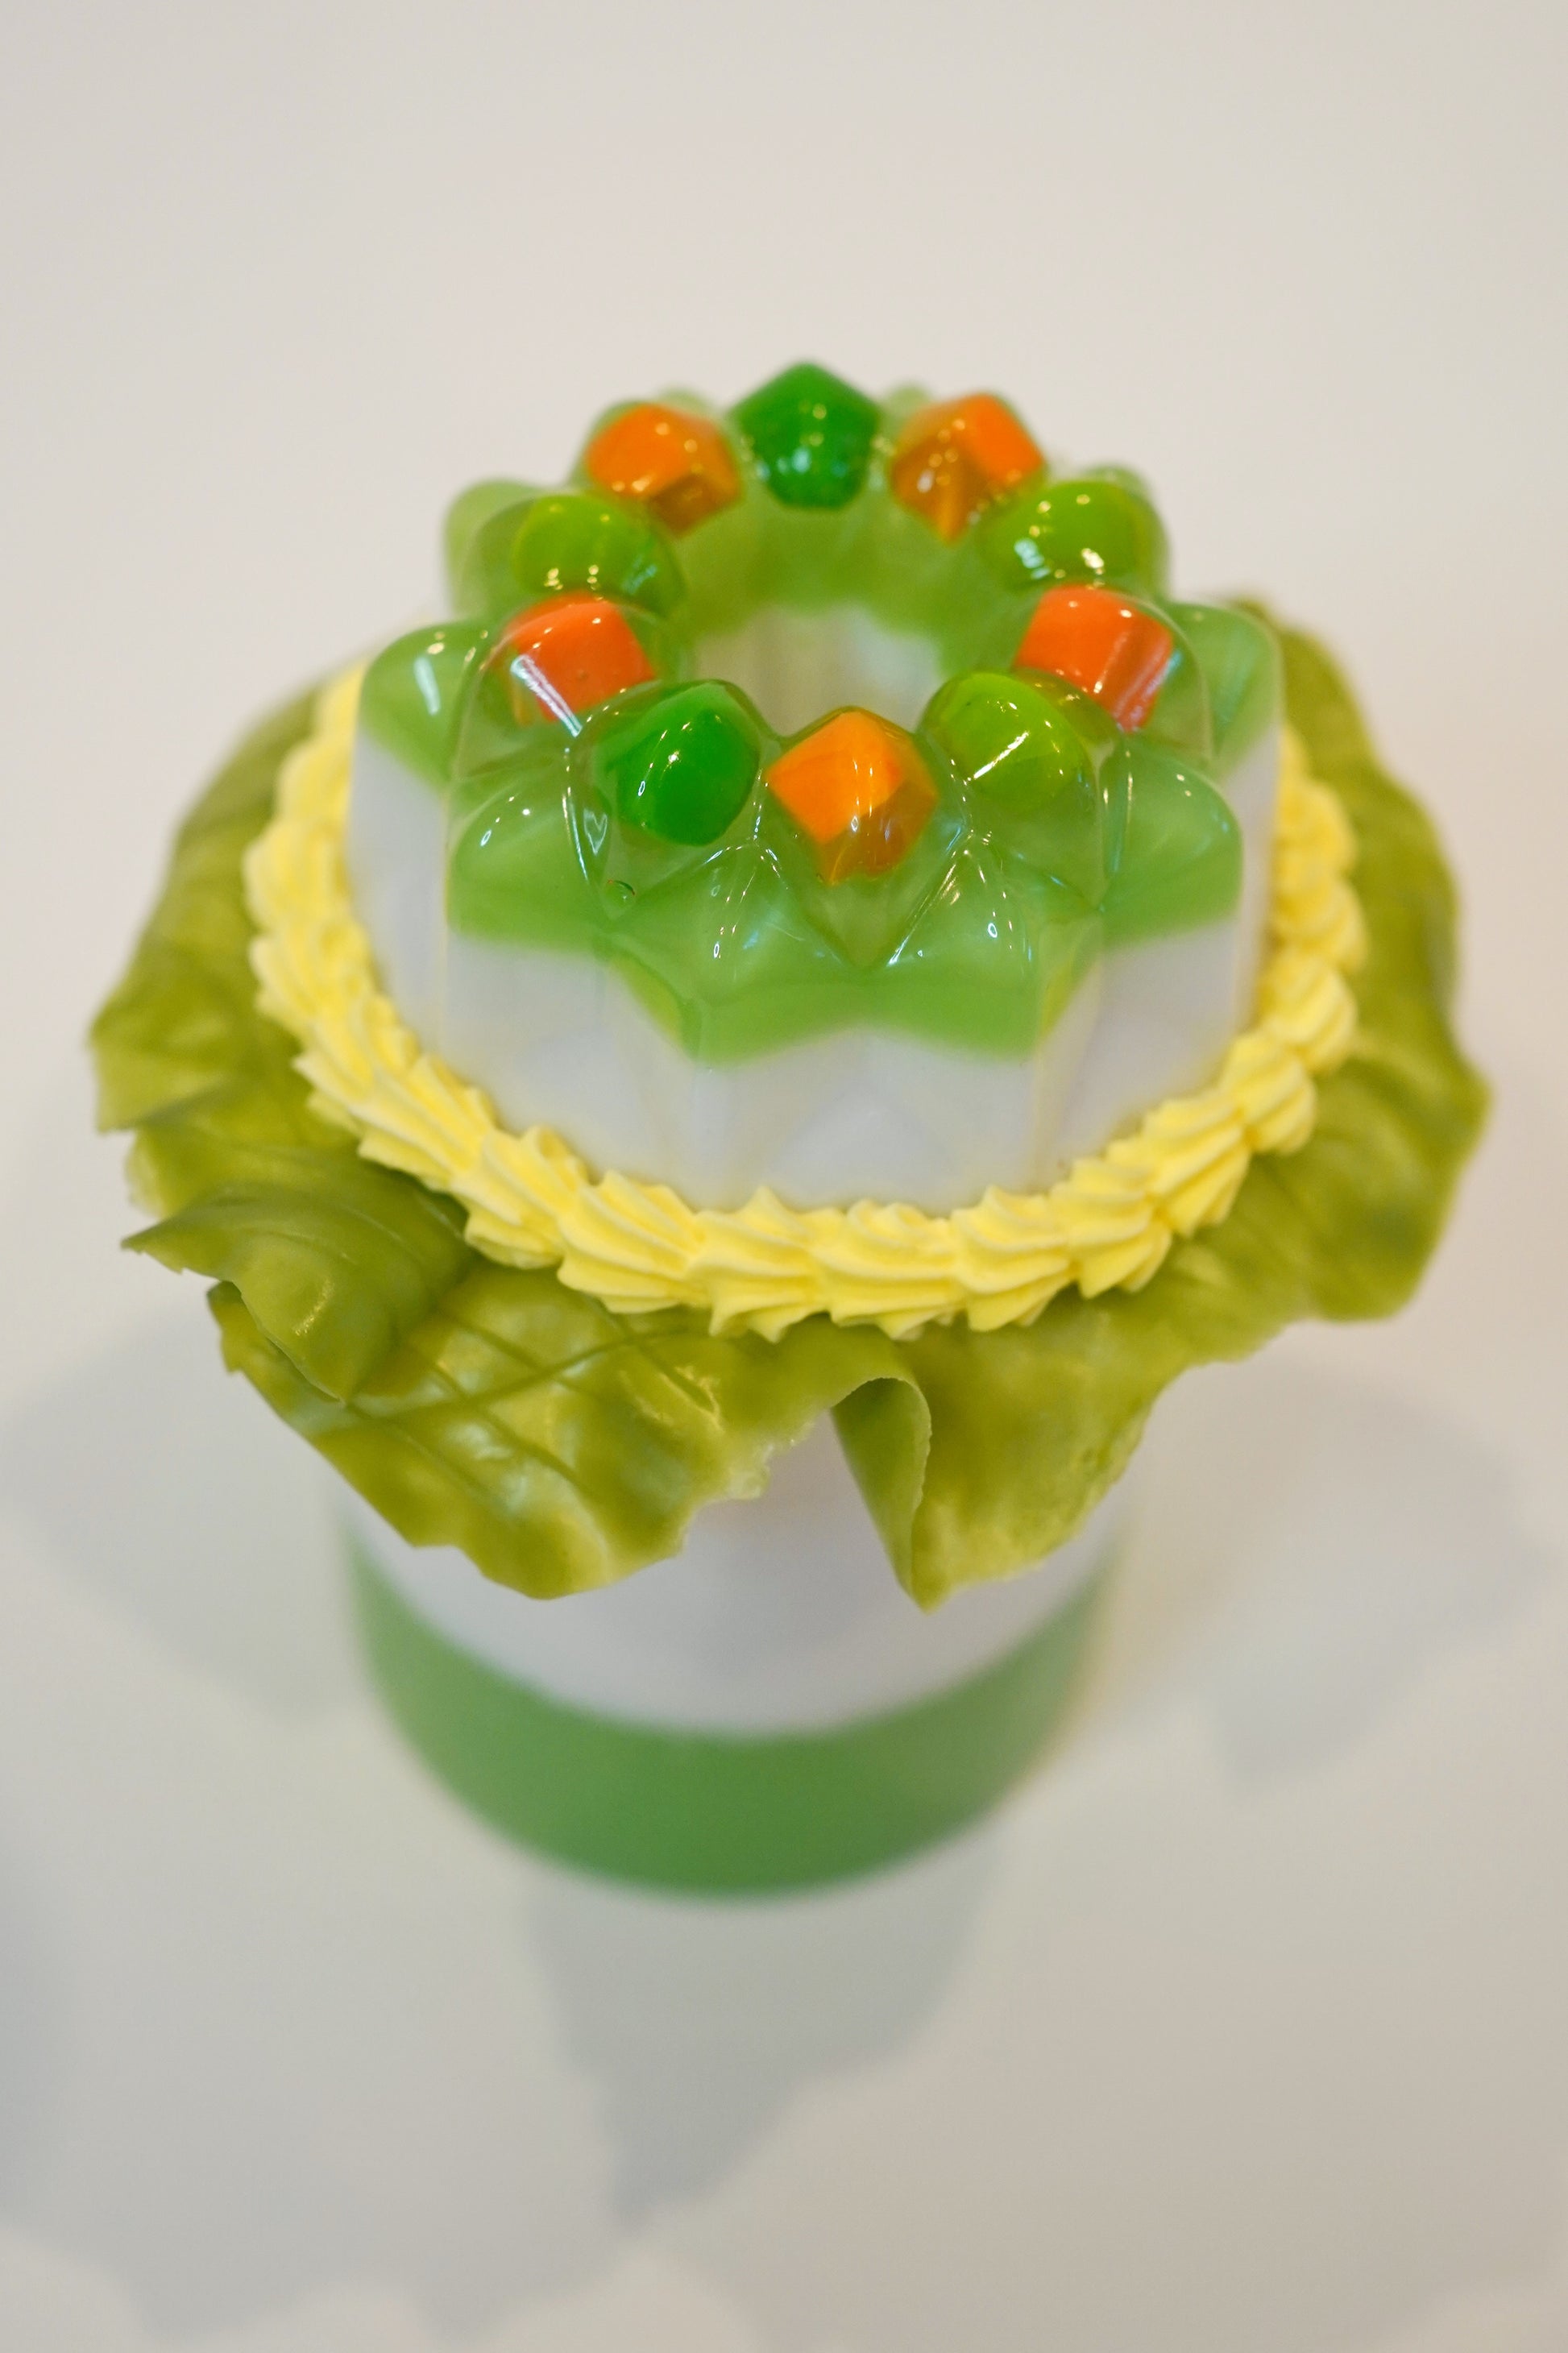 Vintage Savory Jello Jar with Peas and Carrots in Green and White on Plastic Lettuce